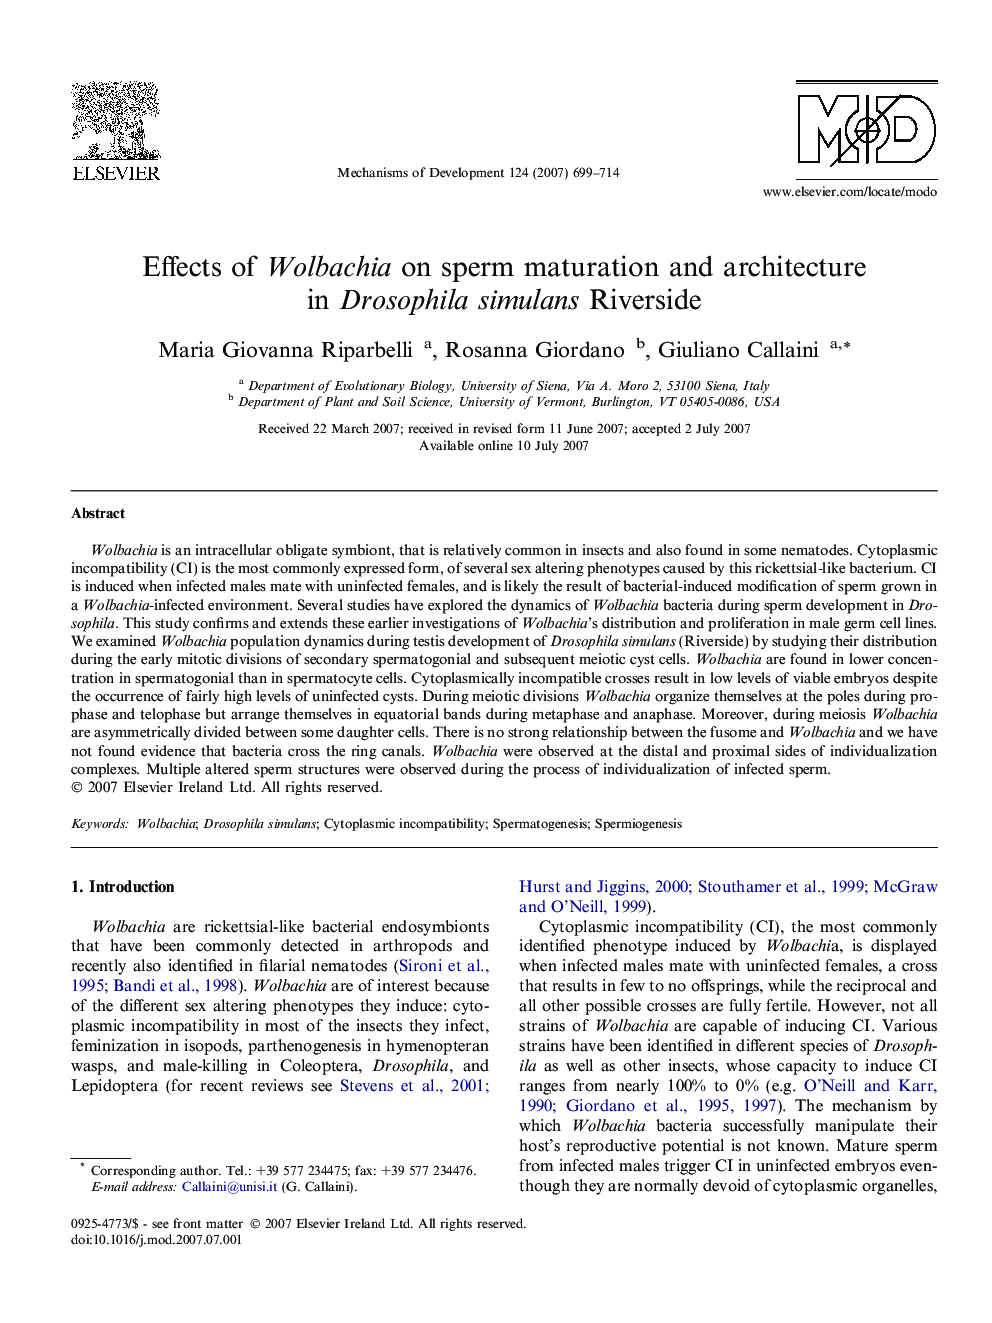 Effects of Wolbachia on sperm maturation and architecture in Drosophila simulans Riverside